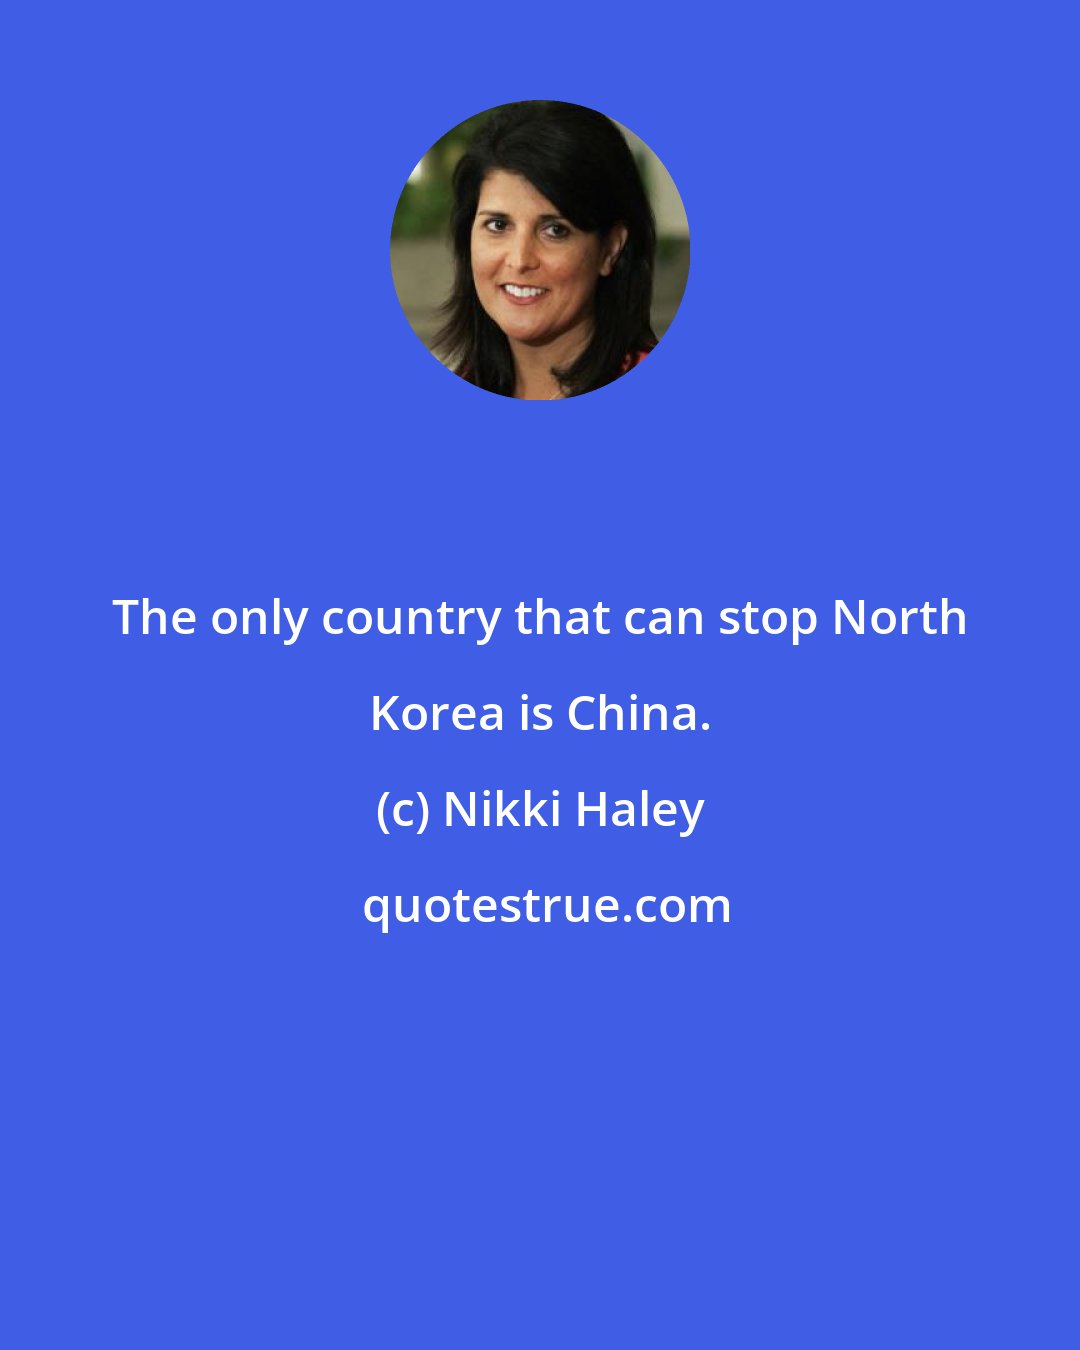 Nikki Haley: The only country that can stop North Korea is China.